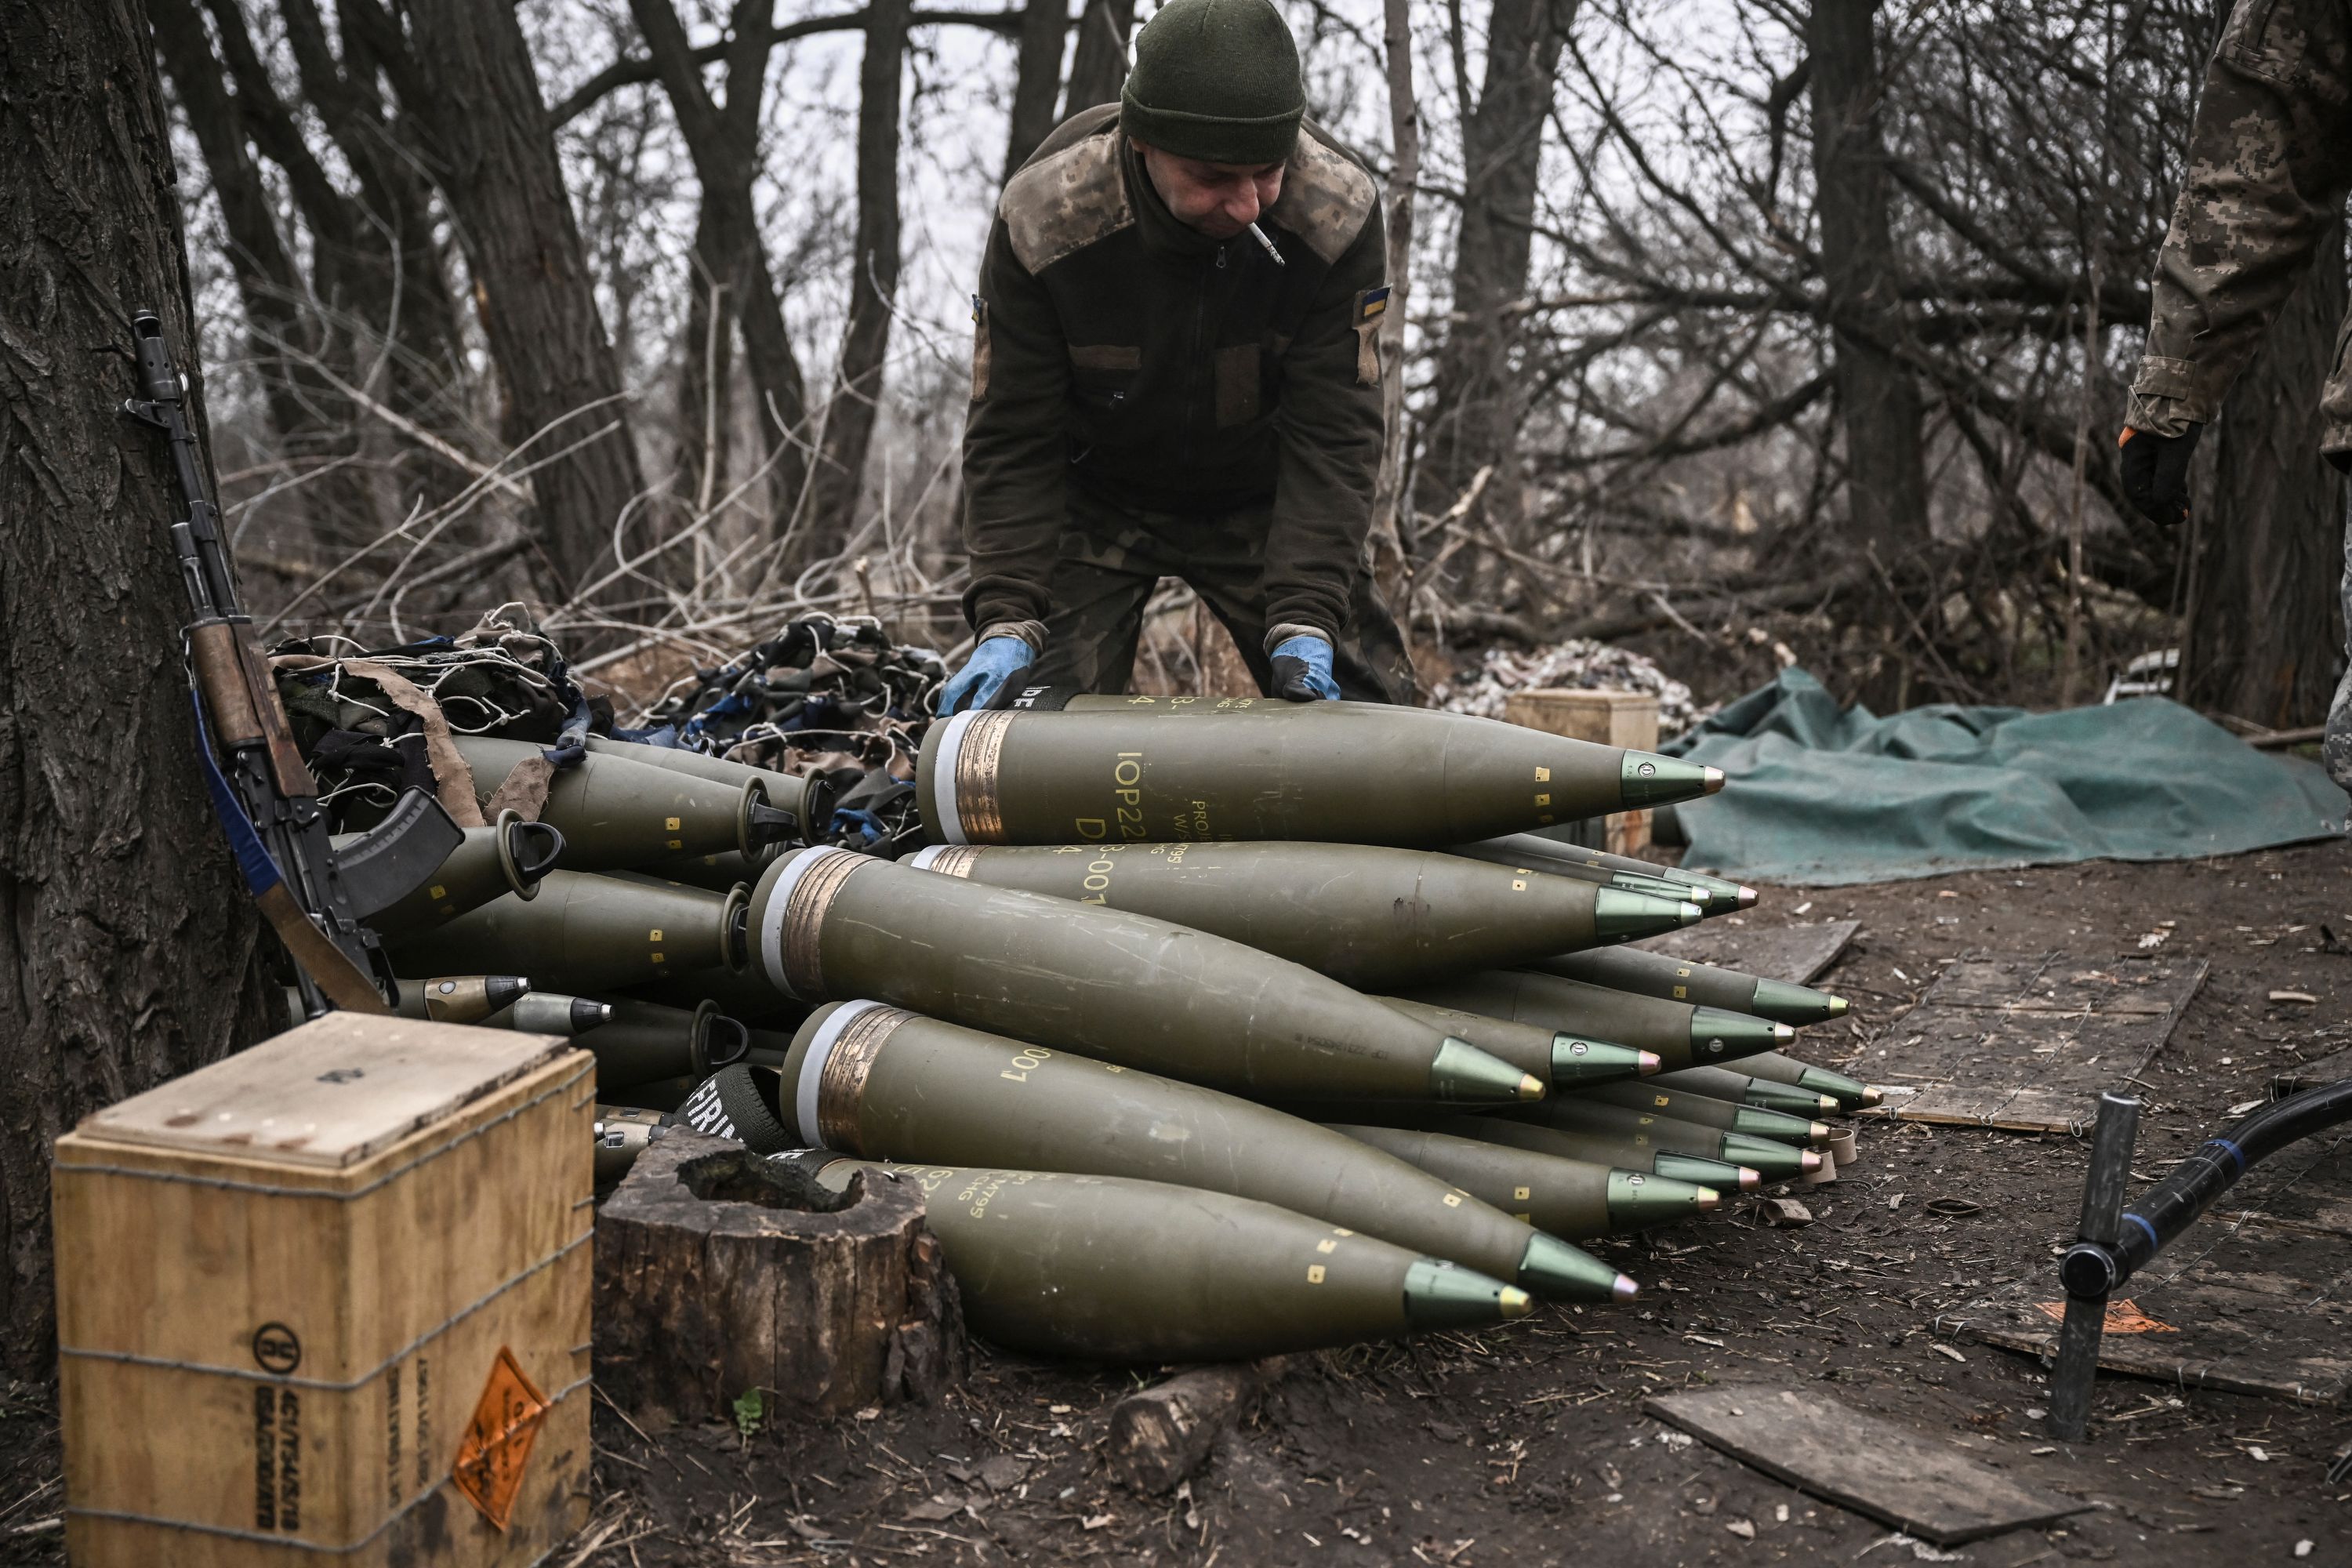 The US Wants to Build Artillery Shells As It Supplies Them to Ukraine